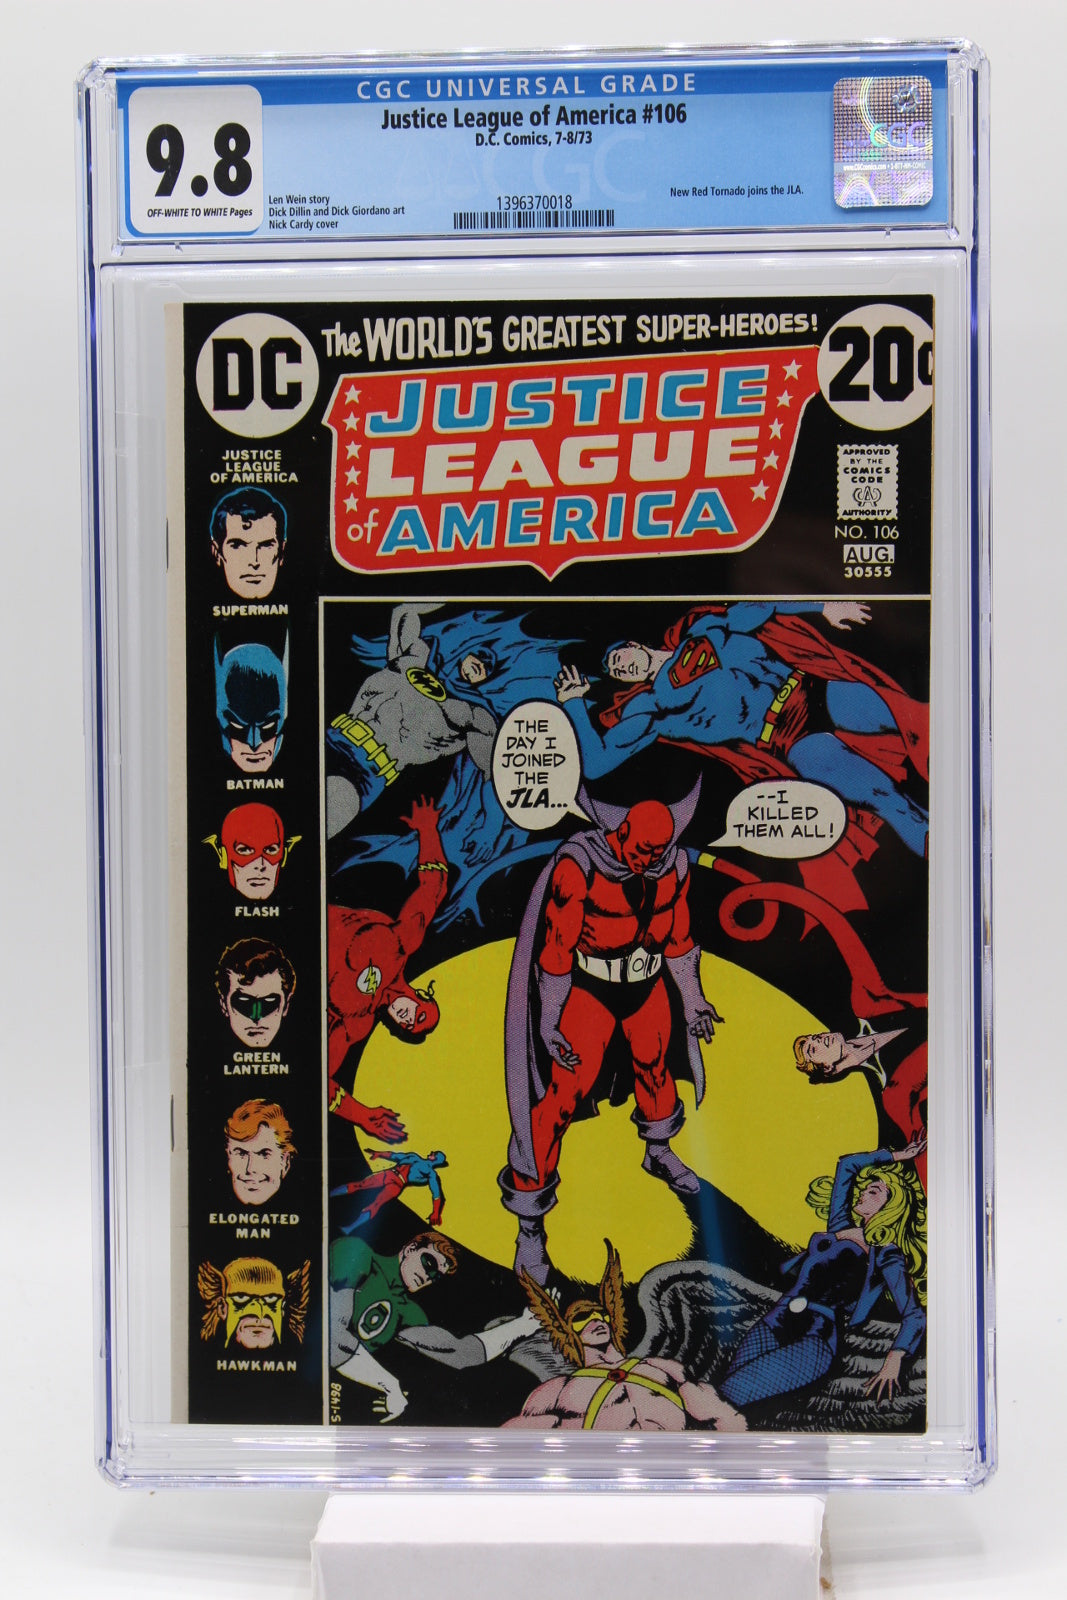 Justice League of America #106 - CGC 9.8 - New Red Tornado joins JLA